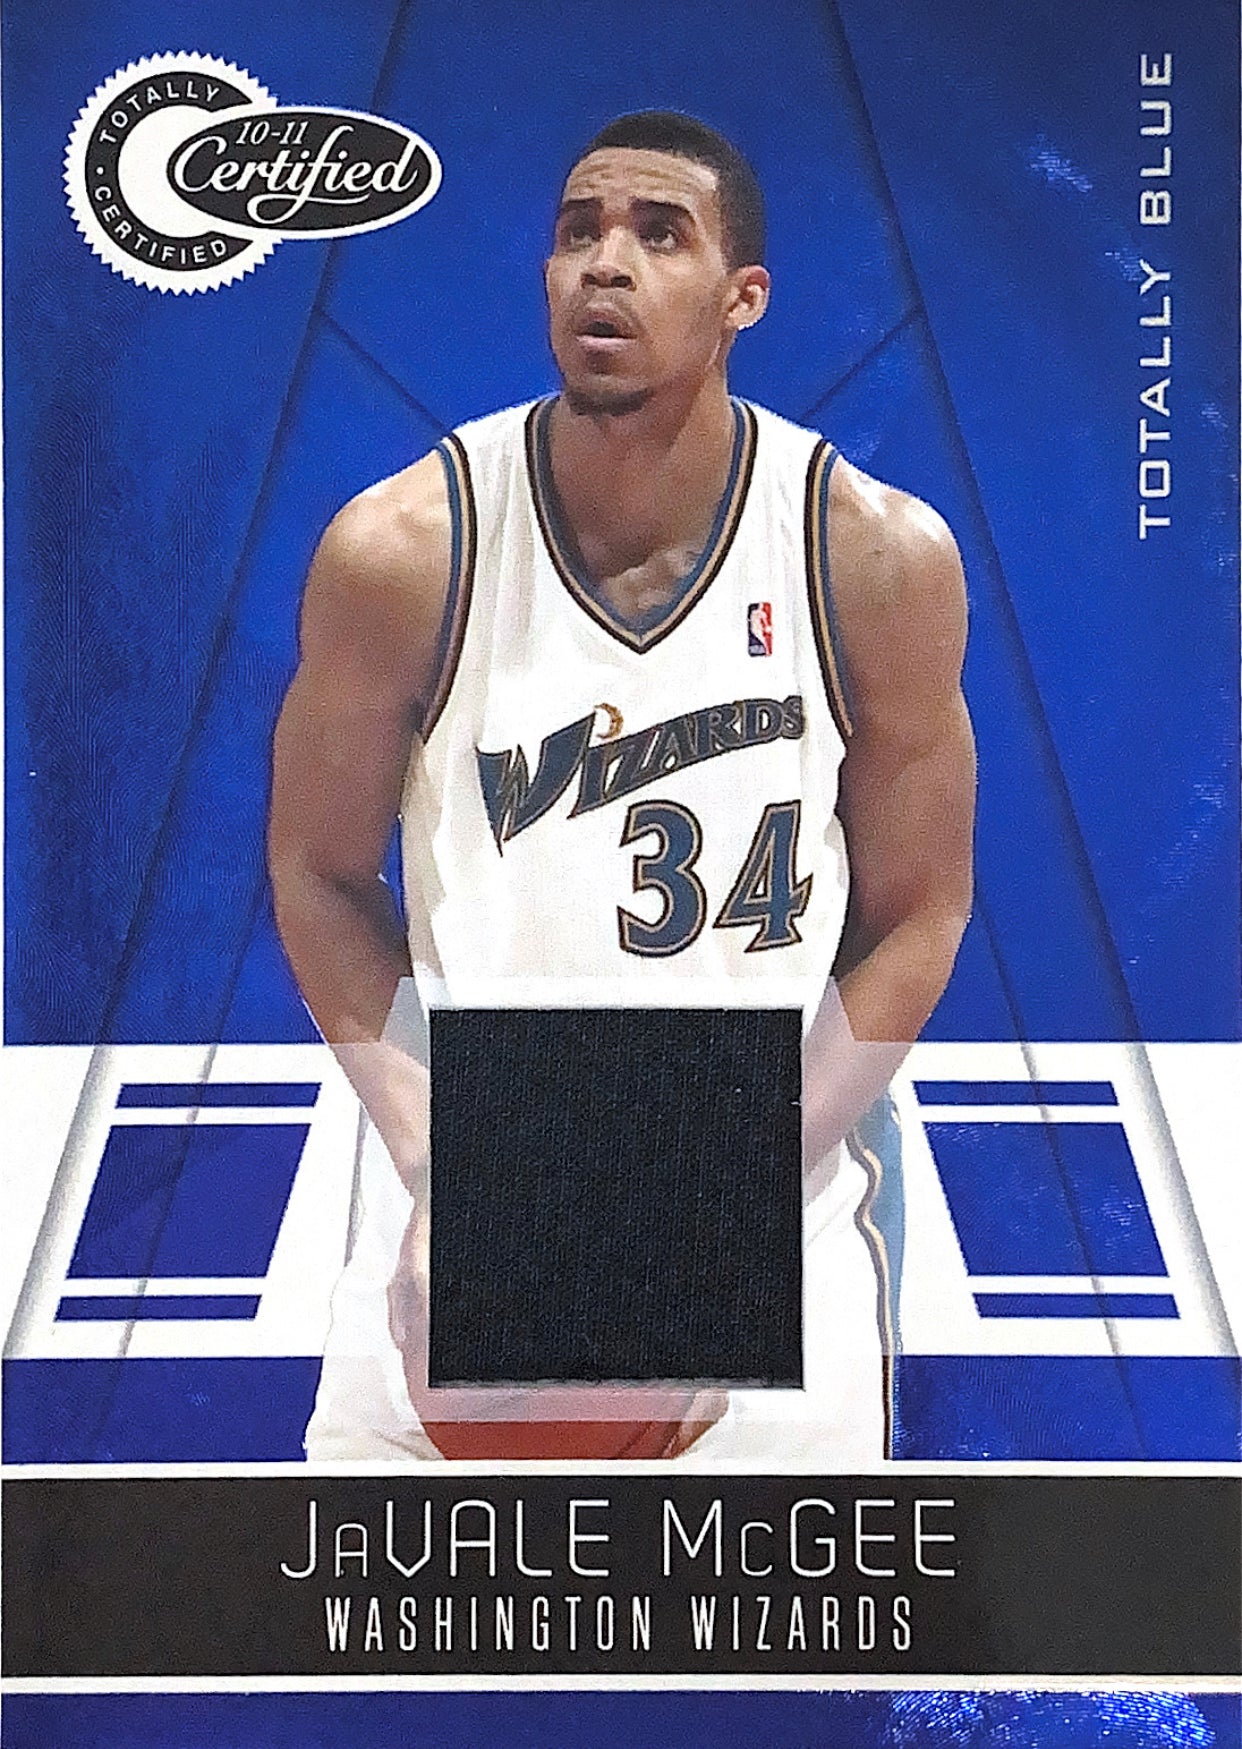 2010-11 Certified Totally Blue Materials JaVale McGee #/99